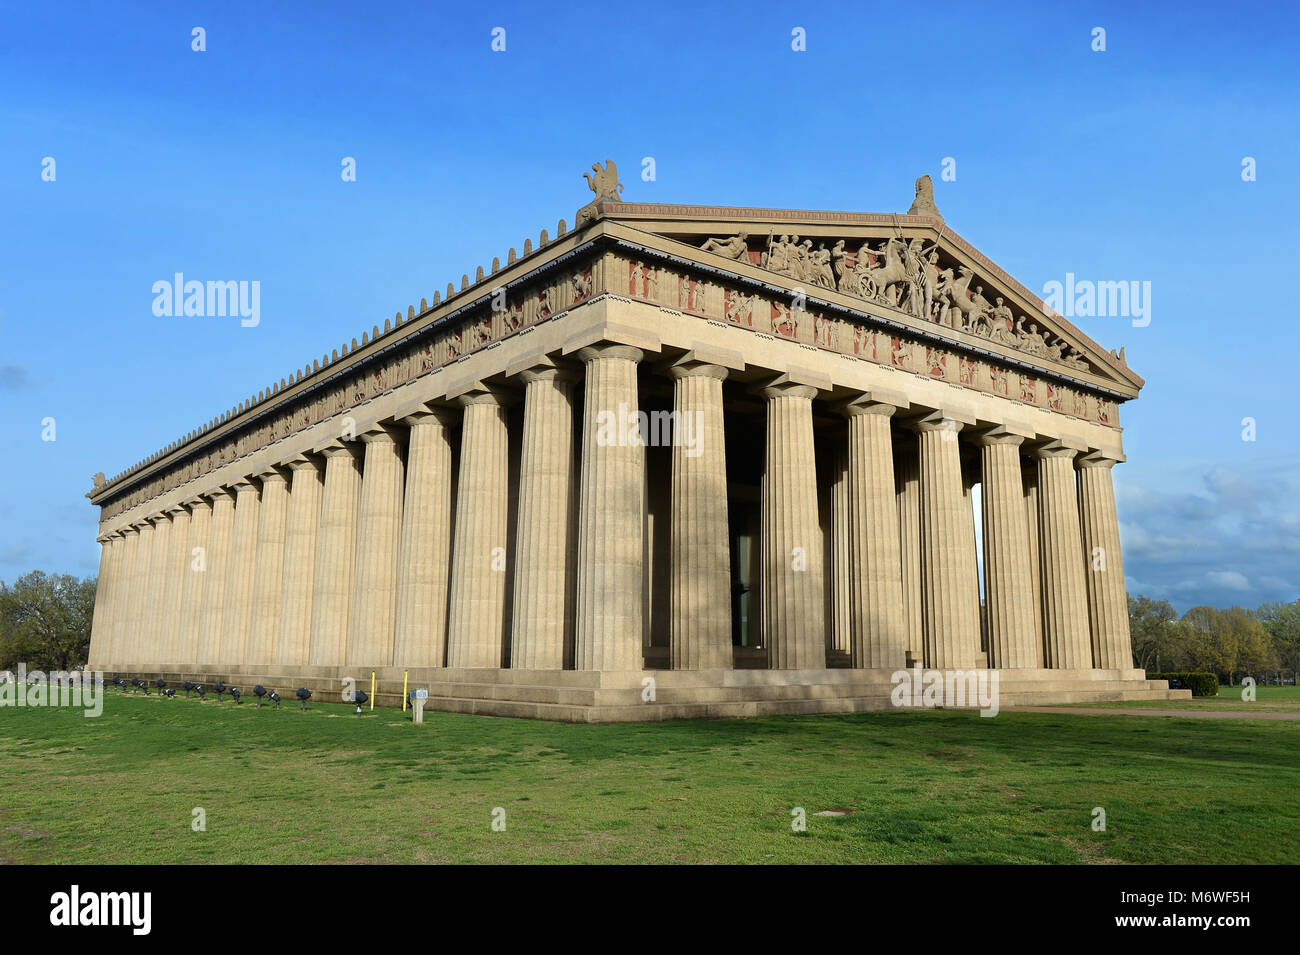 View of replica of Parthenon in Nashville Tennessee during daytime Stock Photo